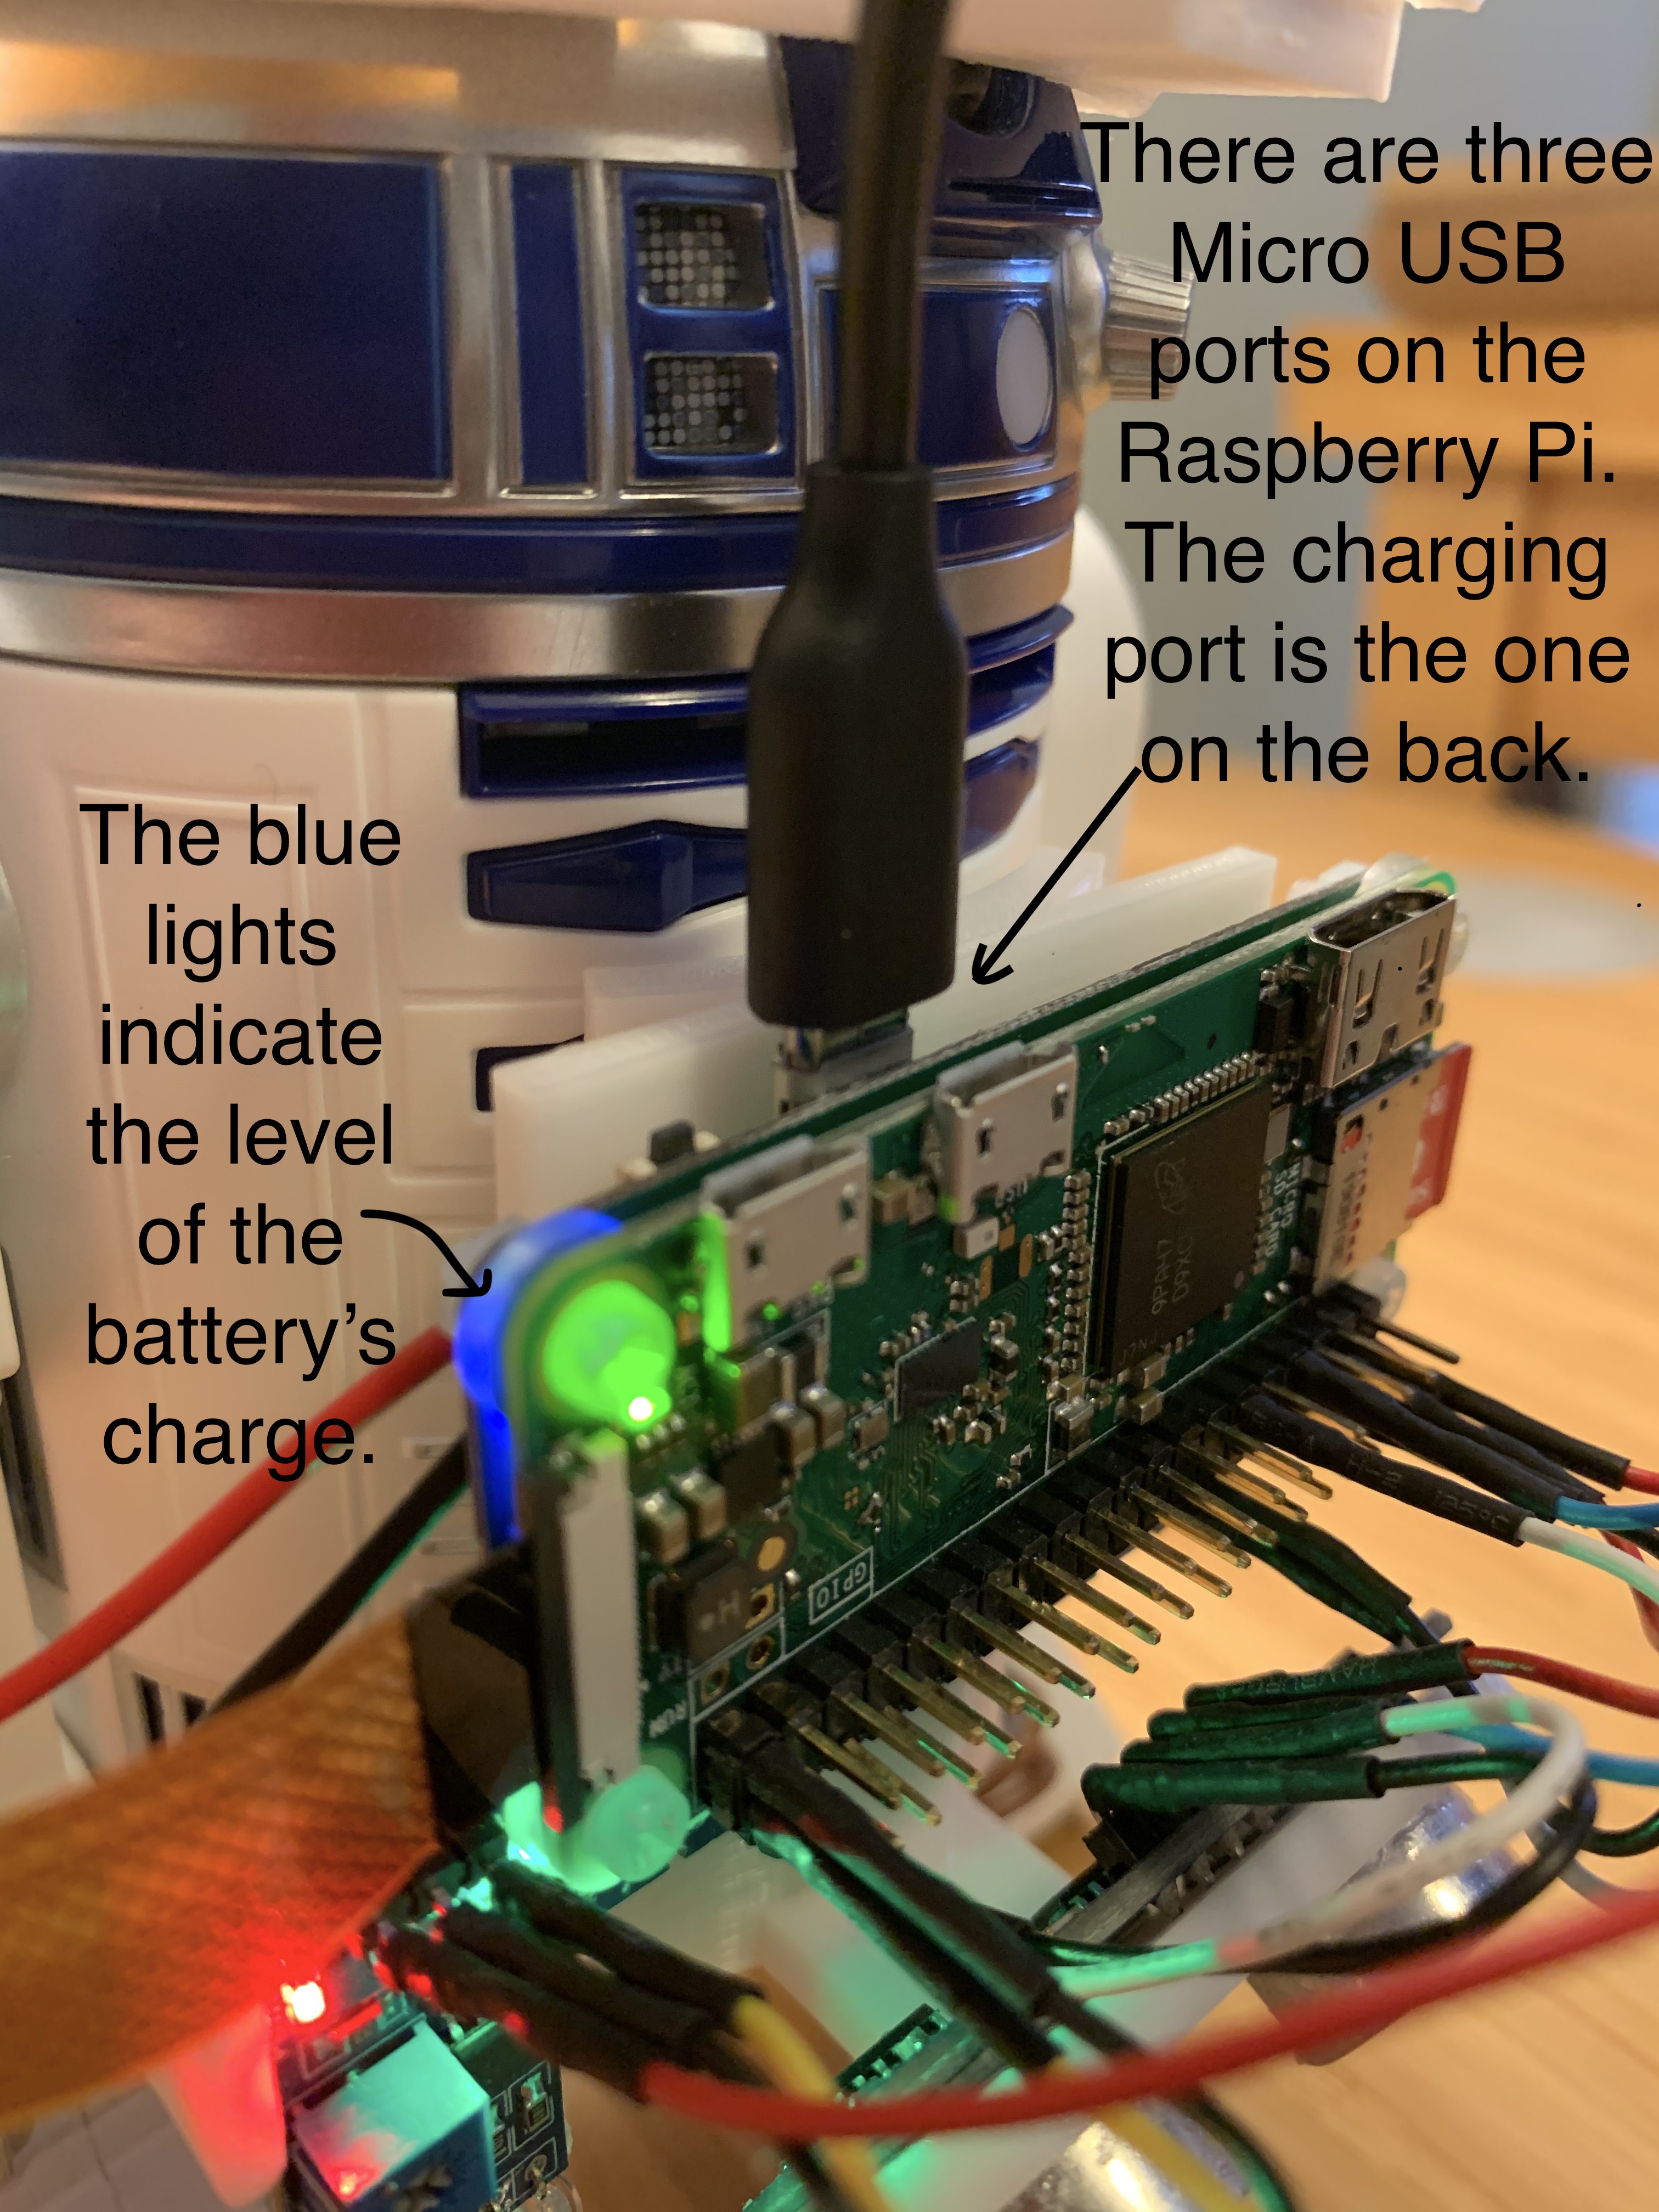 Location of the charging port on the sensor pack